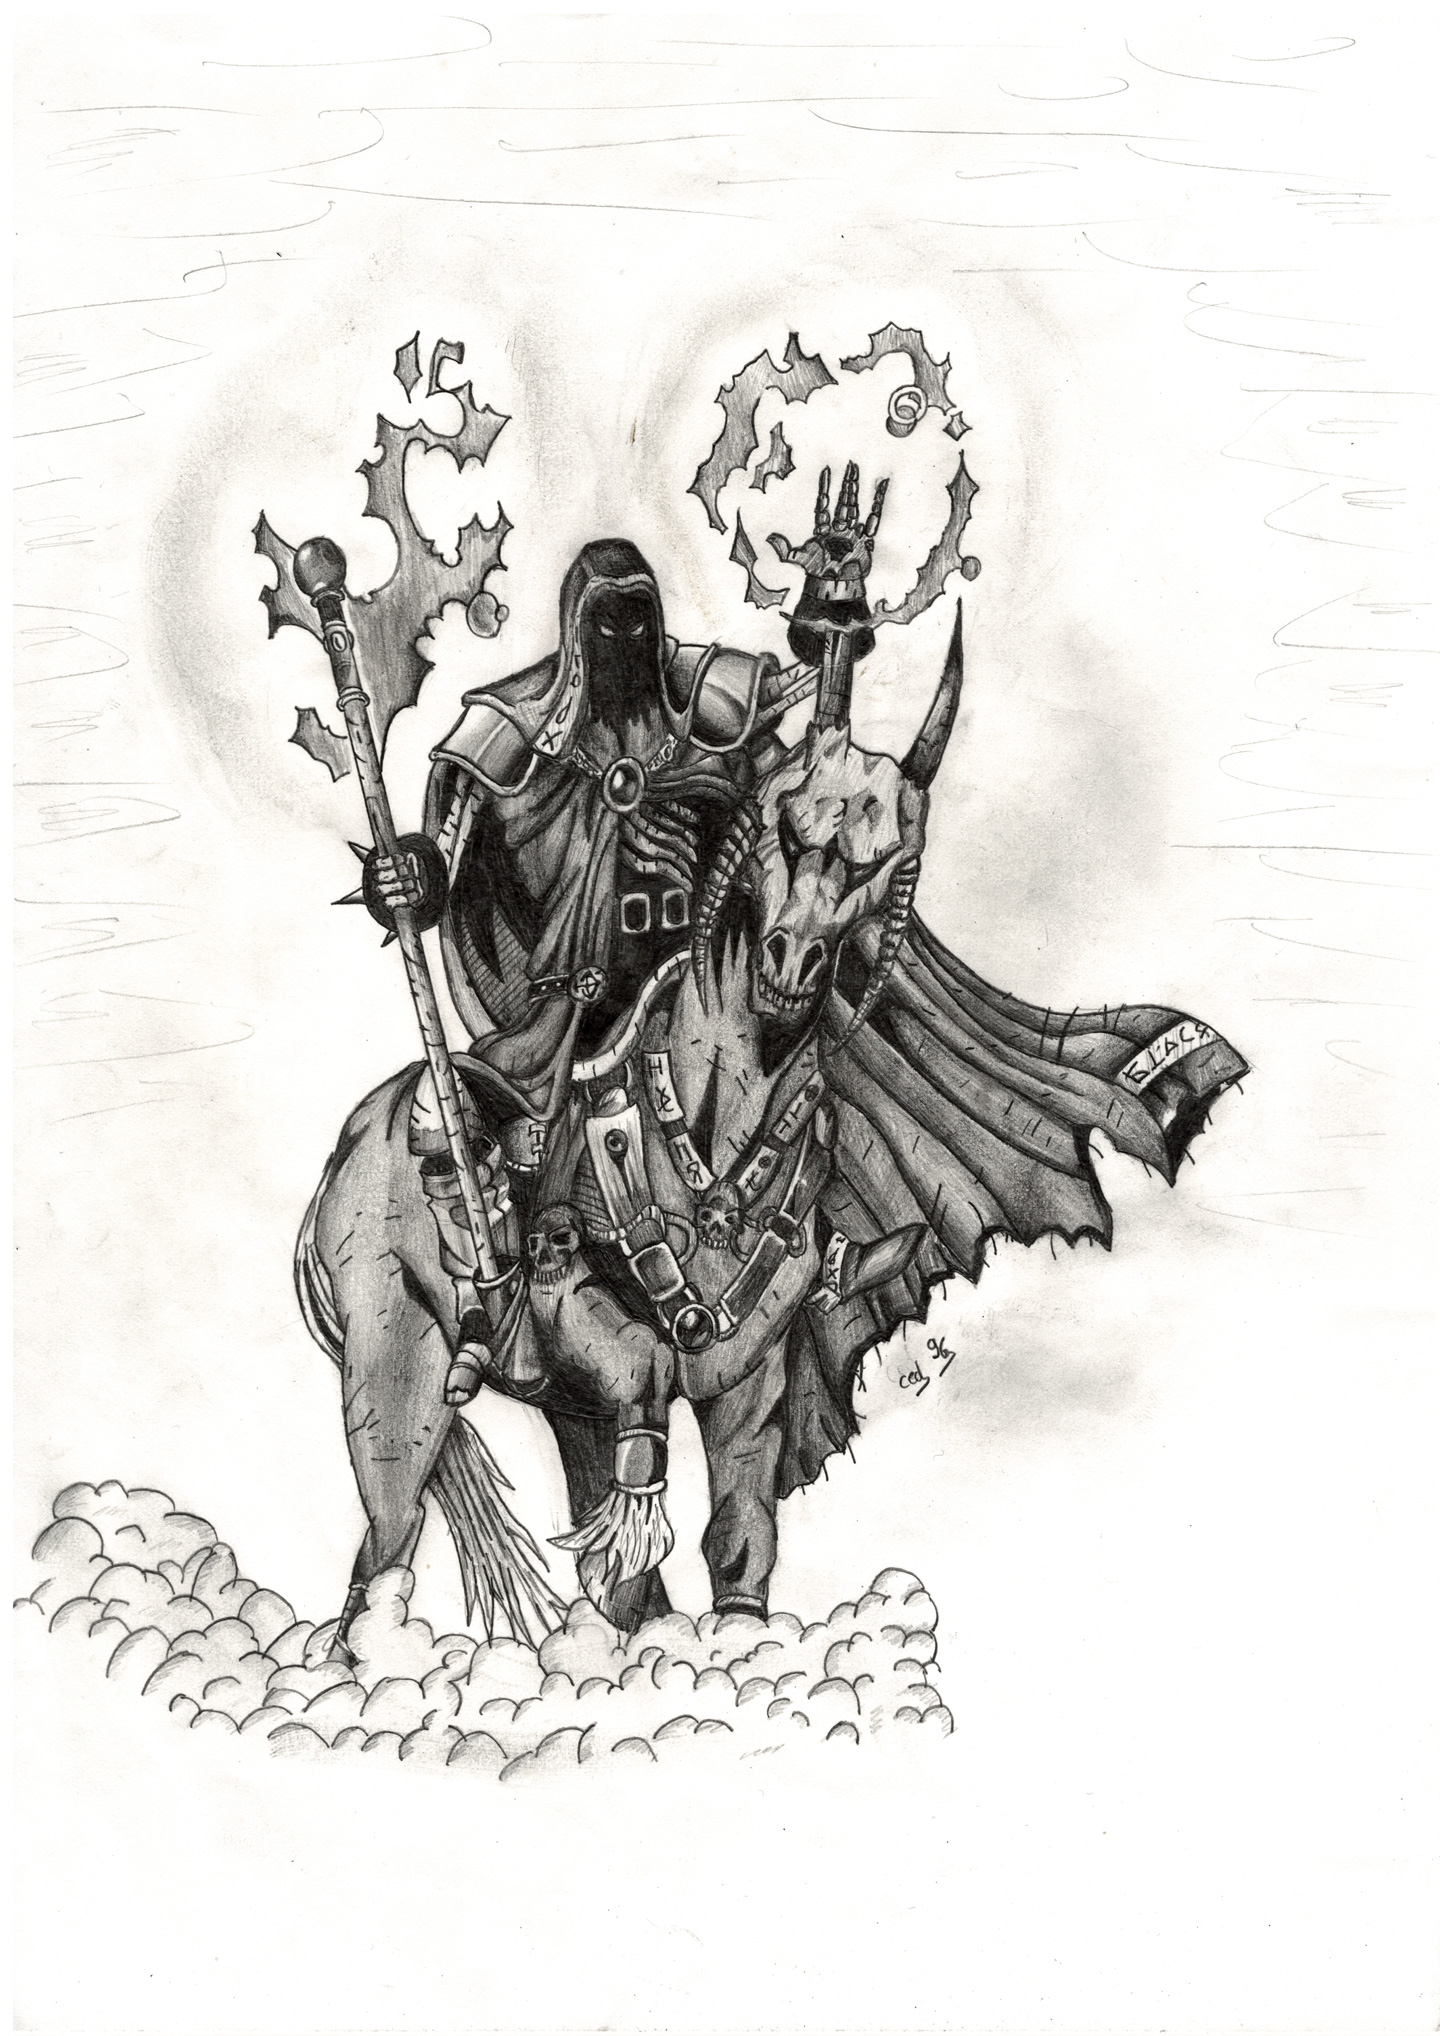 A drawing showing a malefic sorcerer on a dead horse